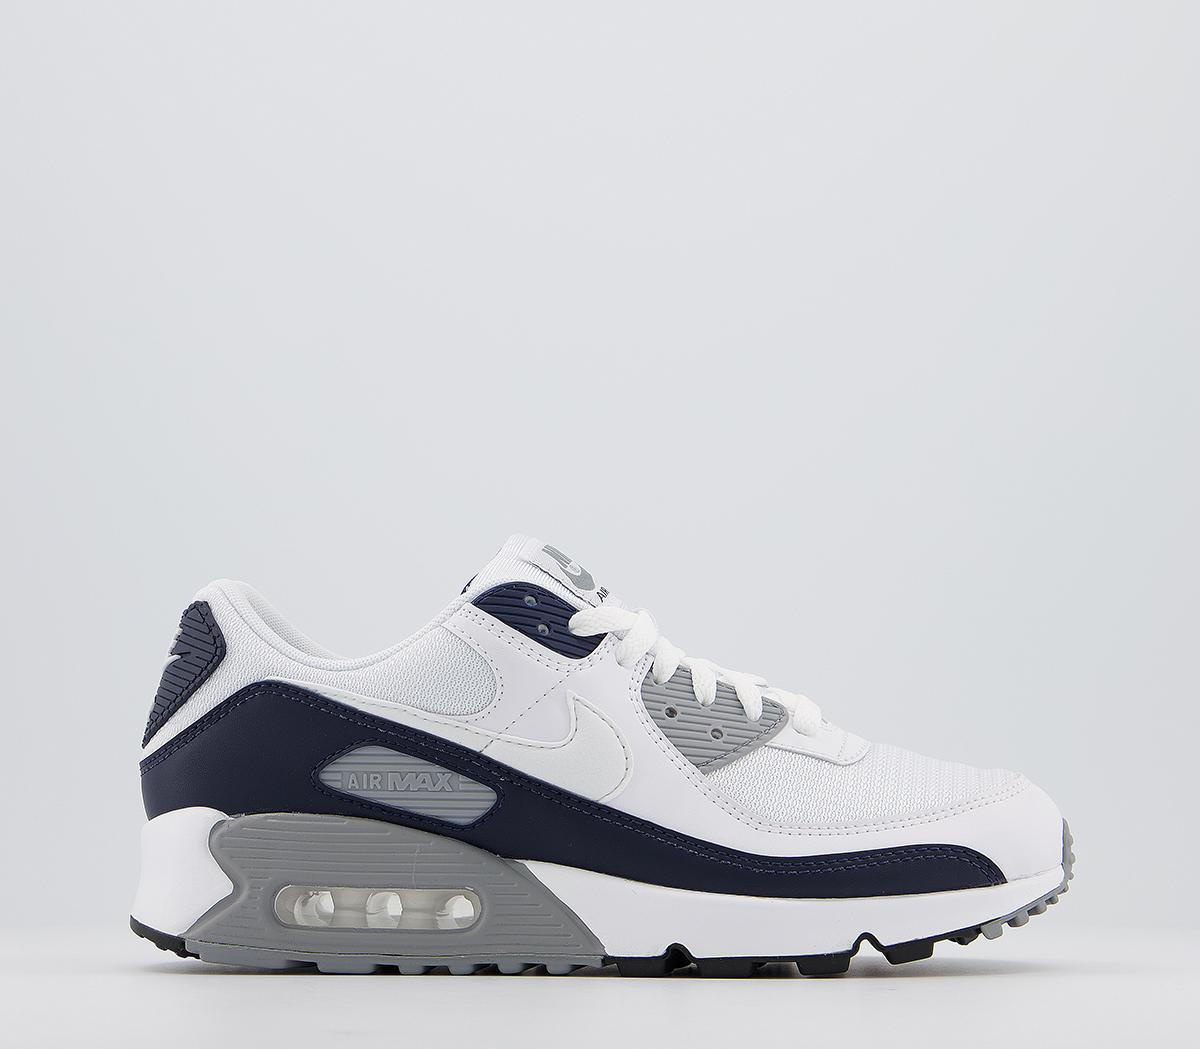 NikeAir Max 90 TrainersWhite White Particle Grey Obsidian